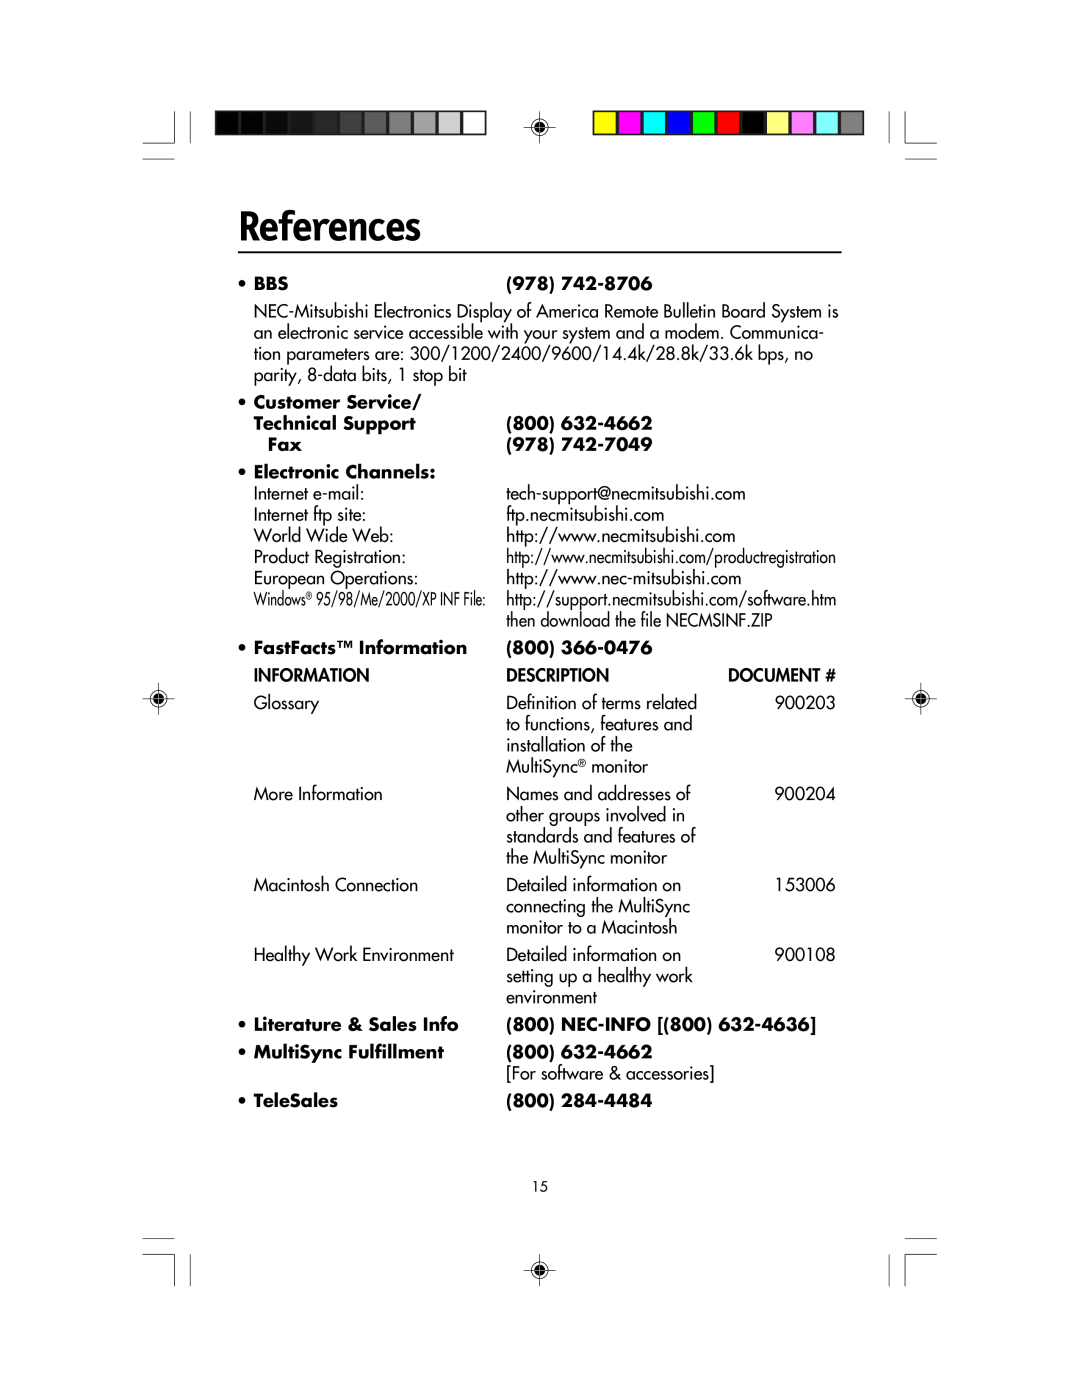 NEC LCD1920NX manual References, Document # 